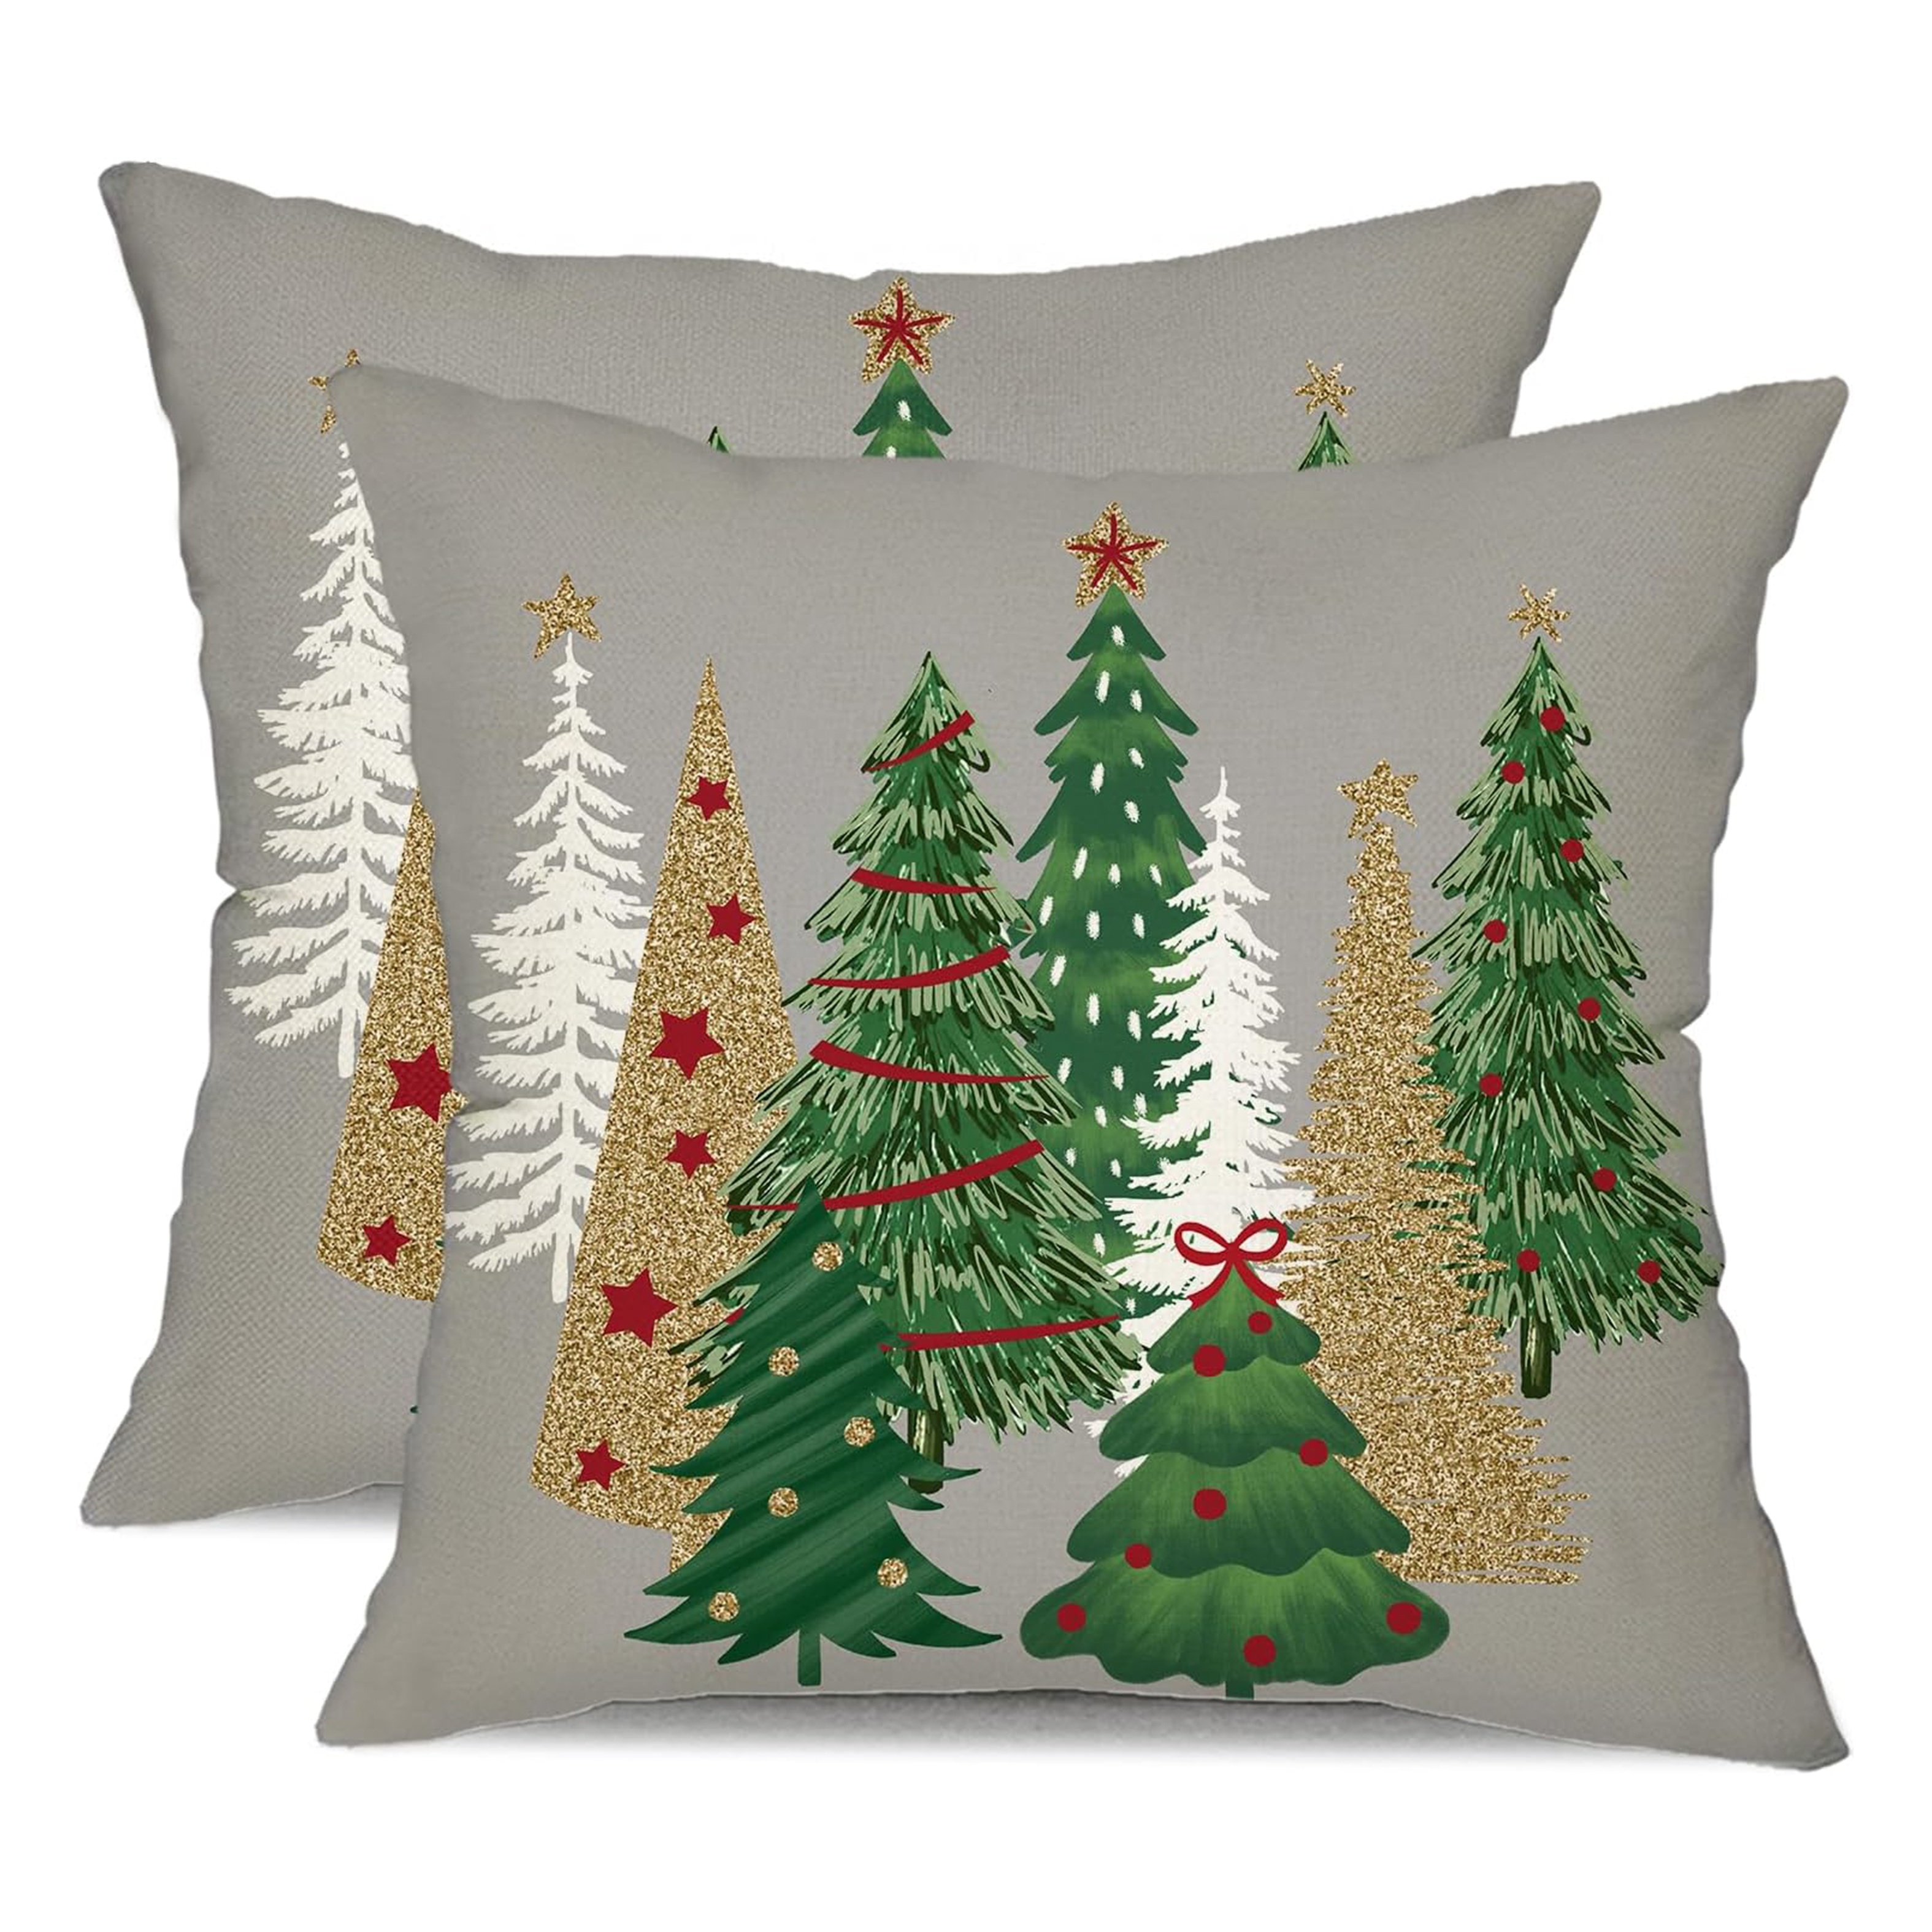 

2-piece Grey Linen Christmas Pillow Covers With Festive Tree Design - Decorative Throw Pillow Cases For Home & Couch, Zip Closure, Machine Washable - 16x16/18x18/20x20 Inches (no Insert)